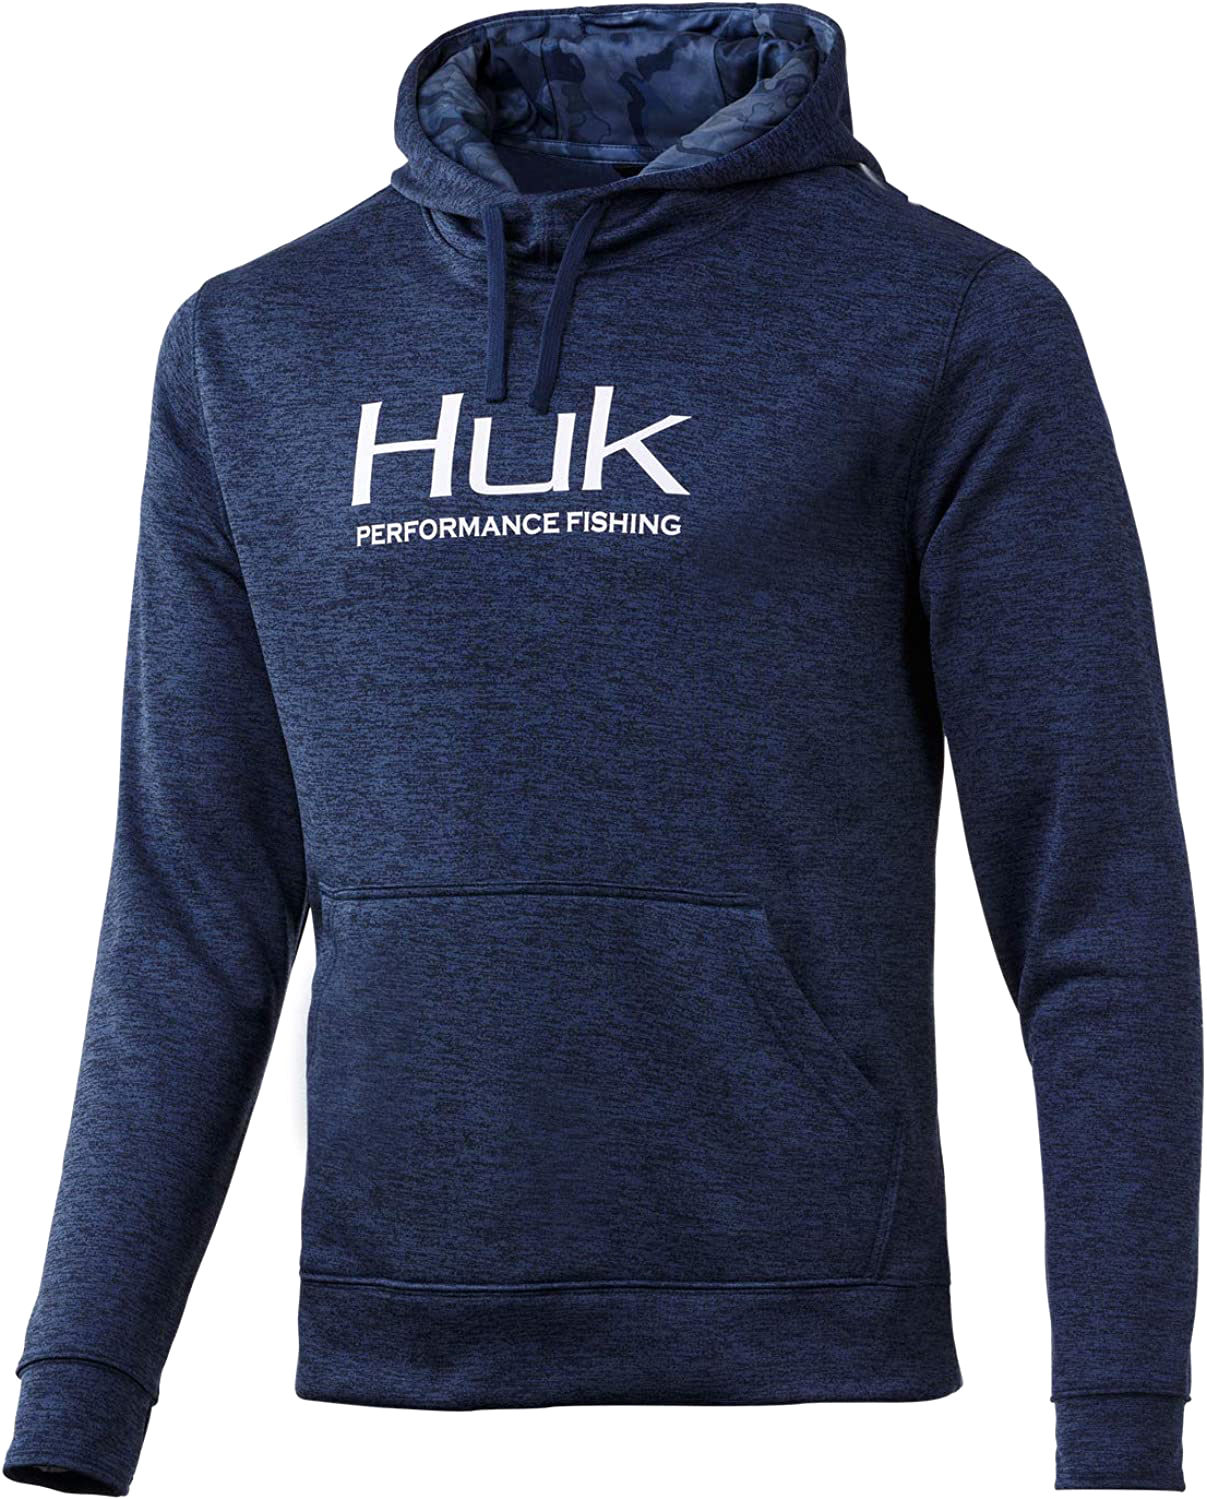 HUK Performance Fishing Fin Hoodie - Mens H1300049-416-S with Free